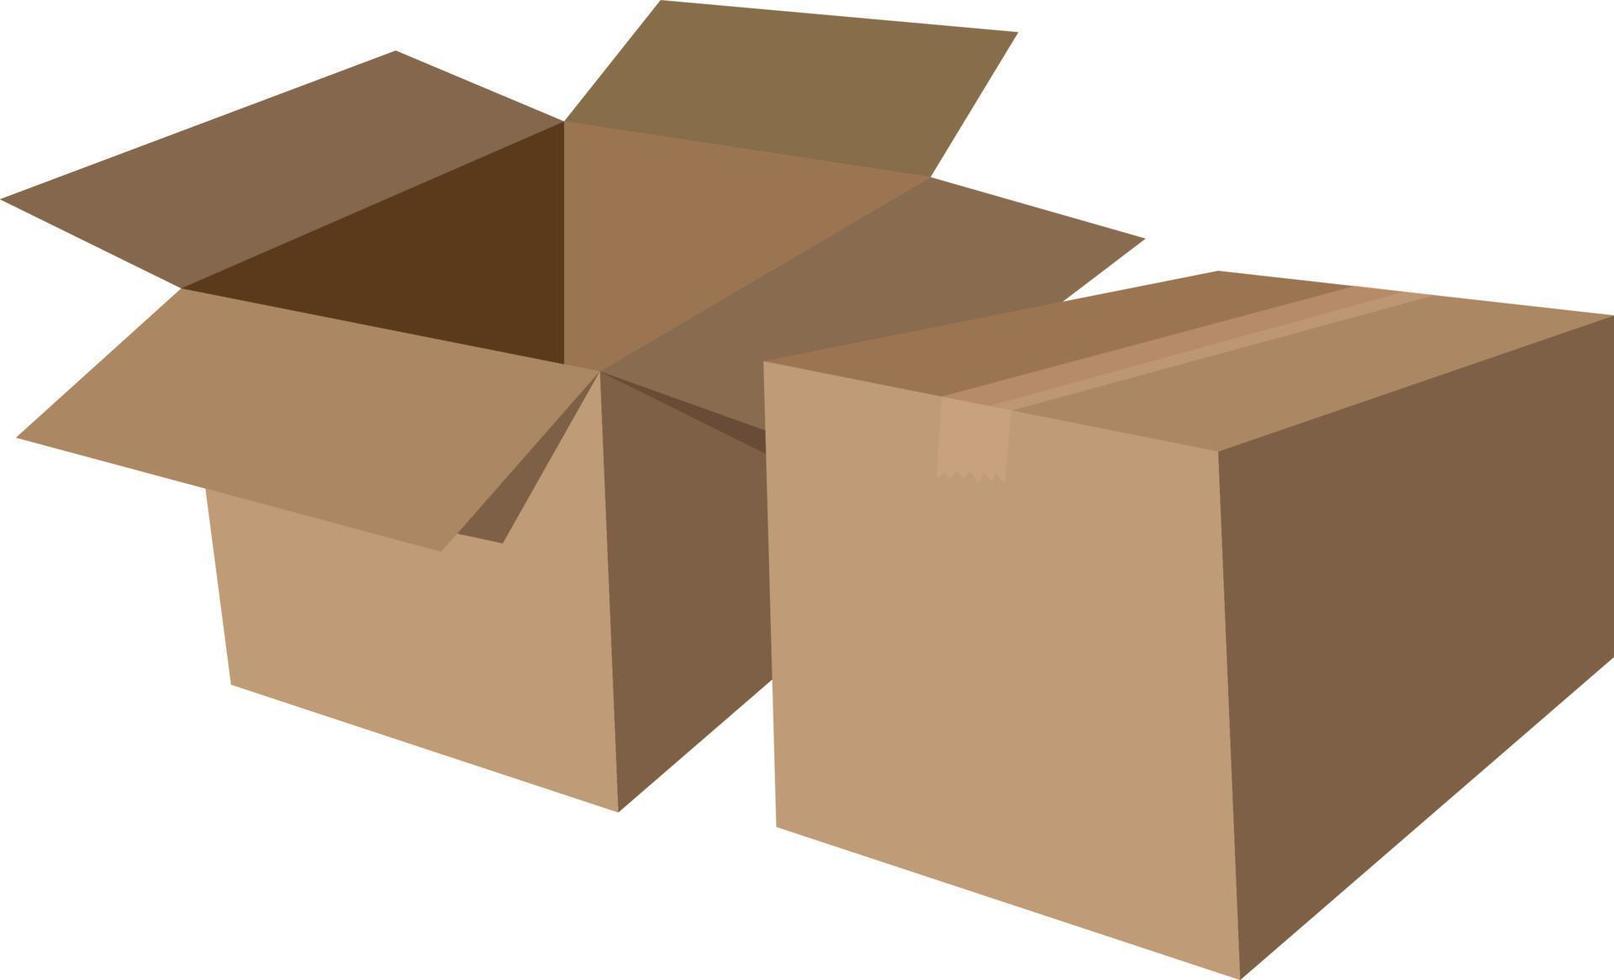 Cardboard boxes, illustration, vector on white background